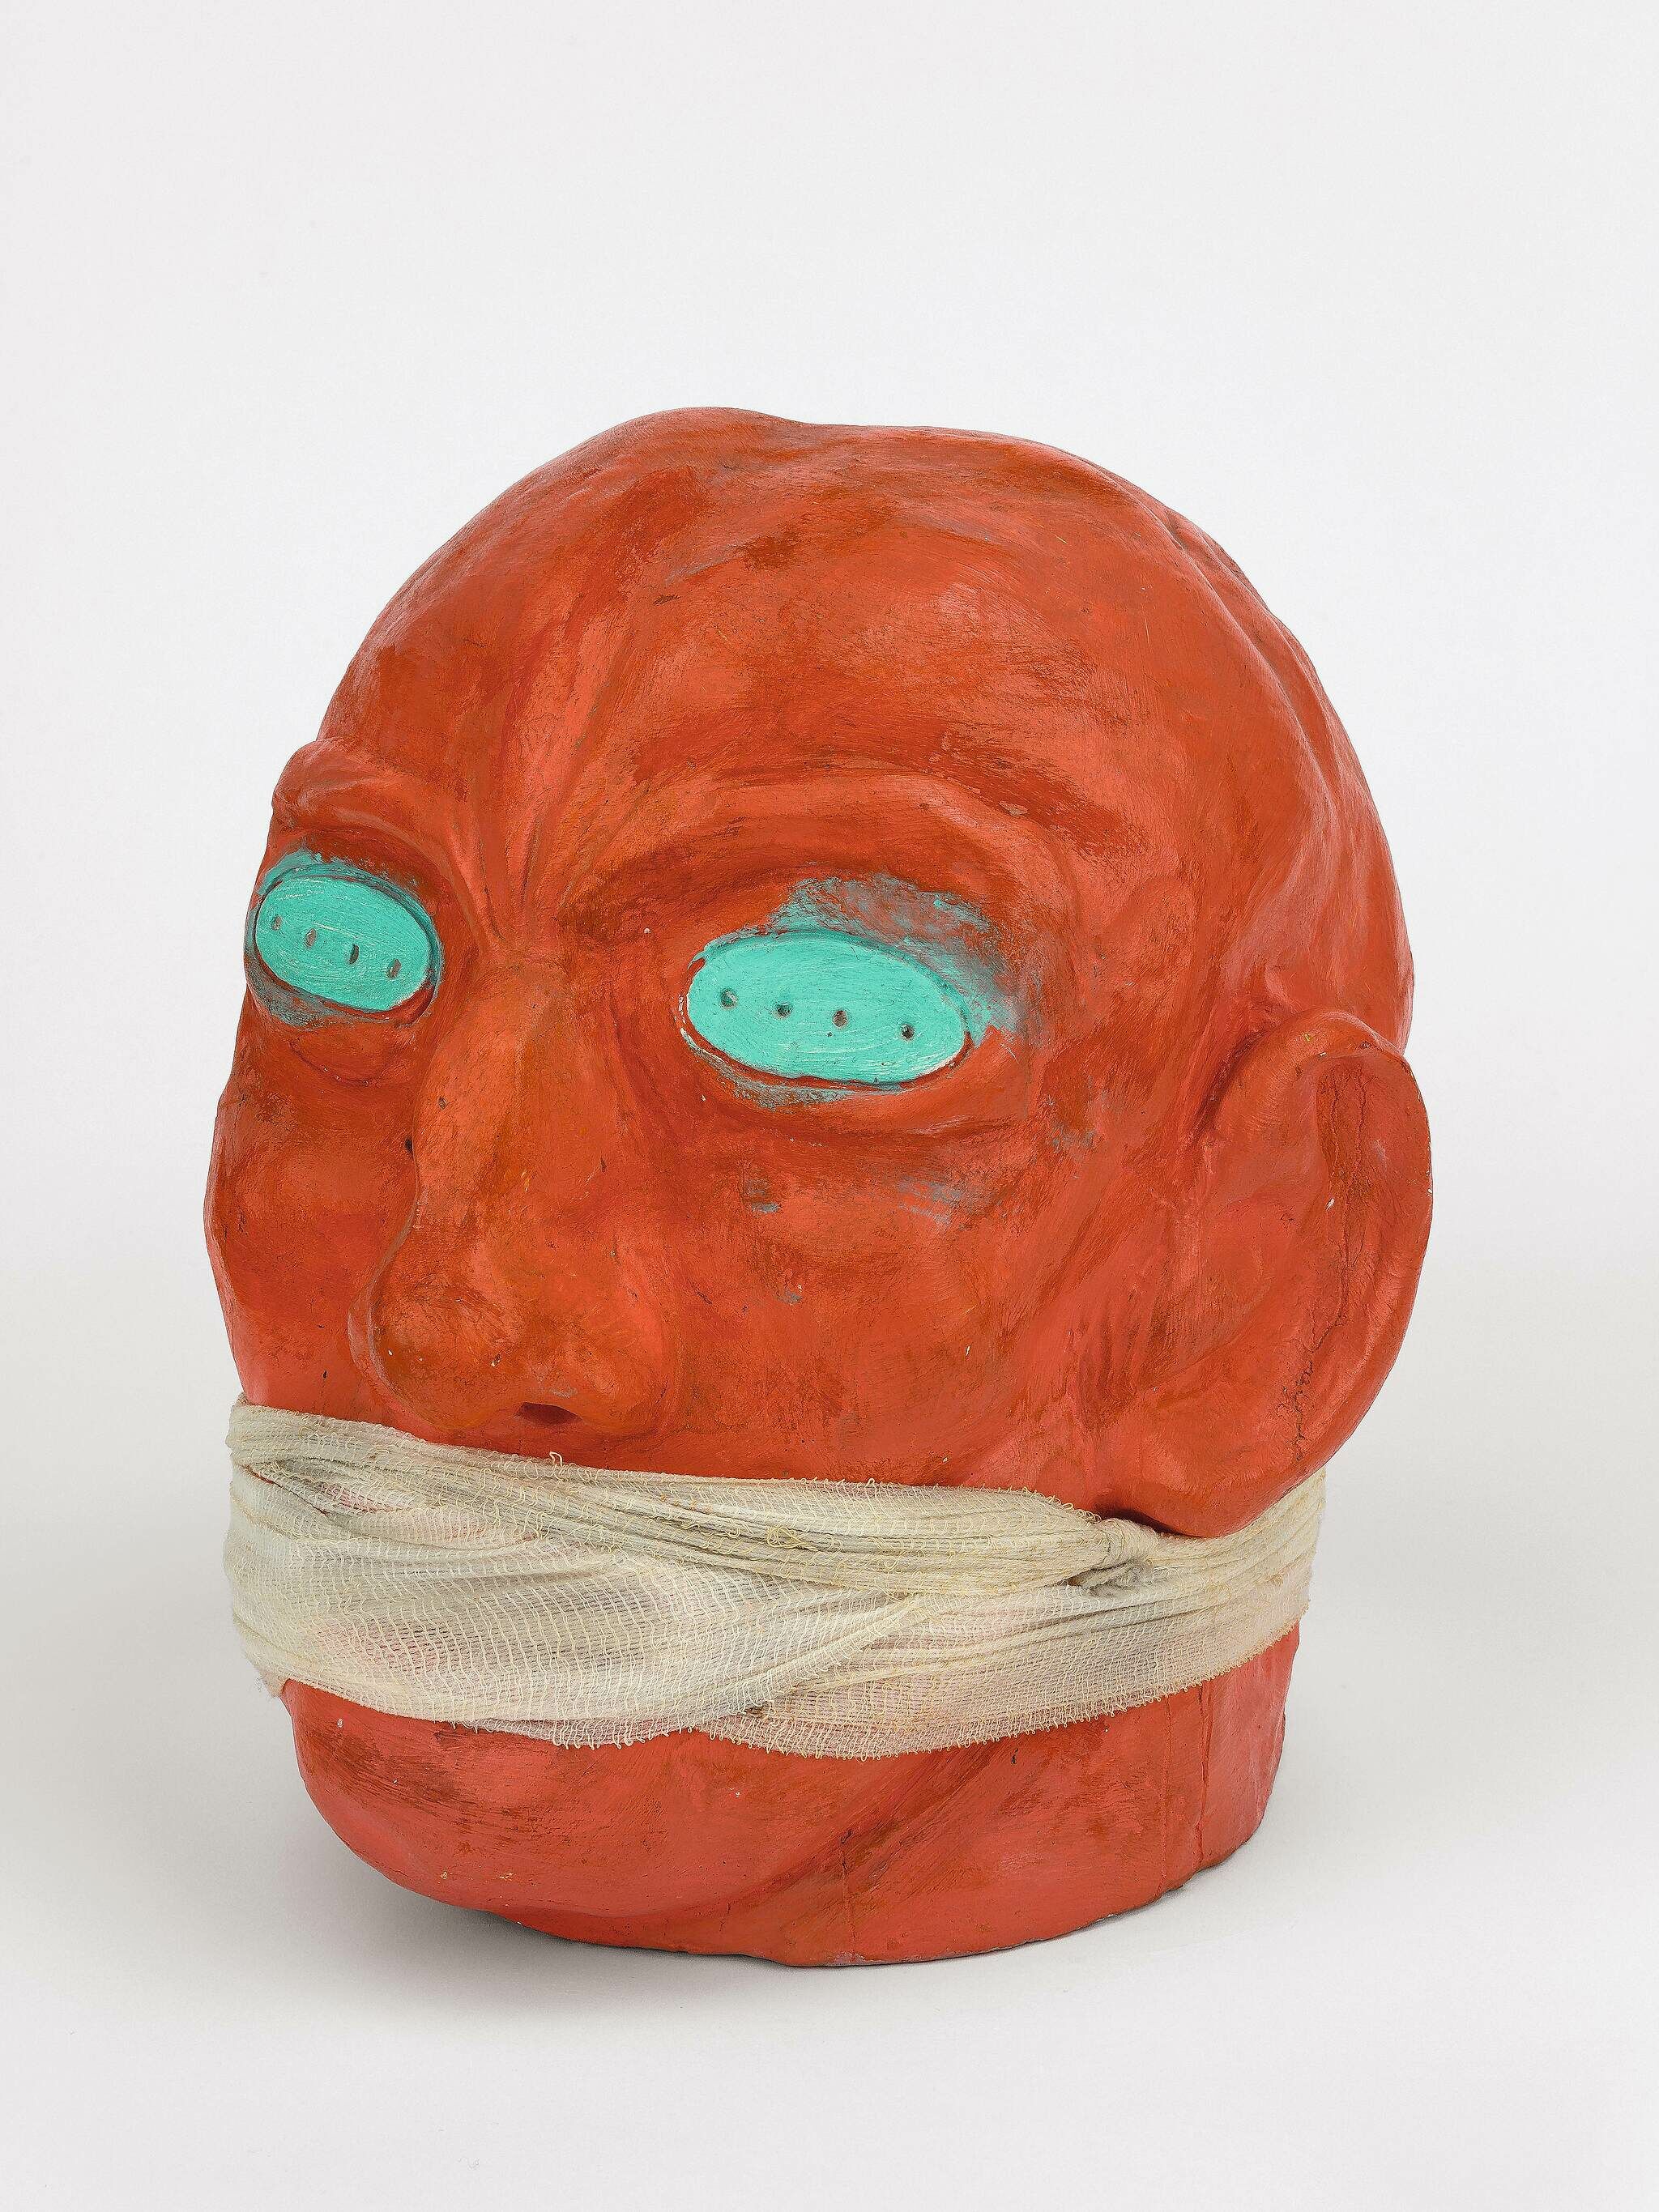 Head painted red with bandage around mouth.